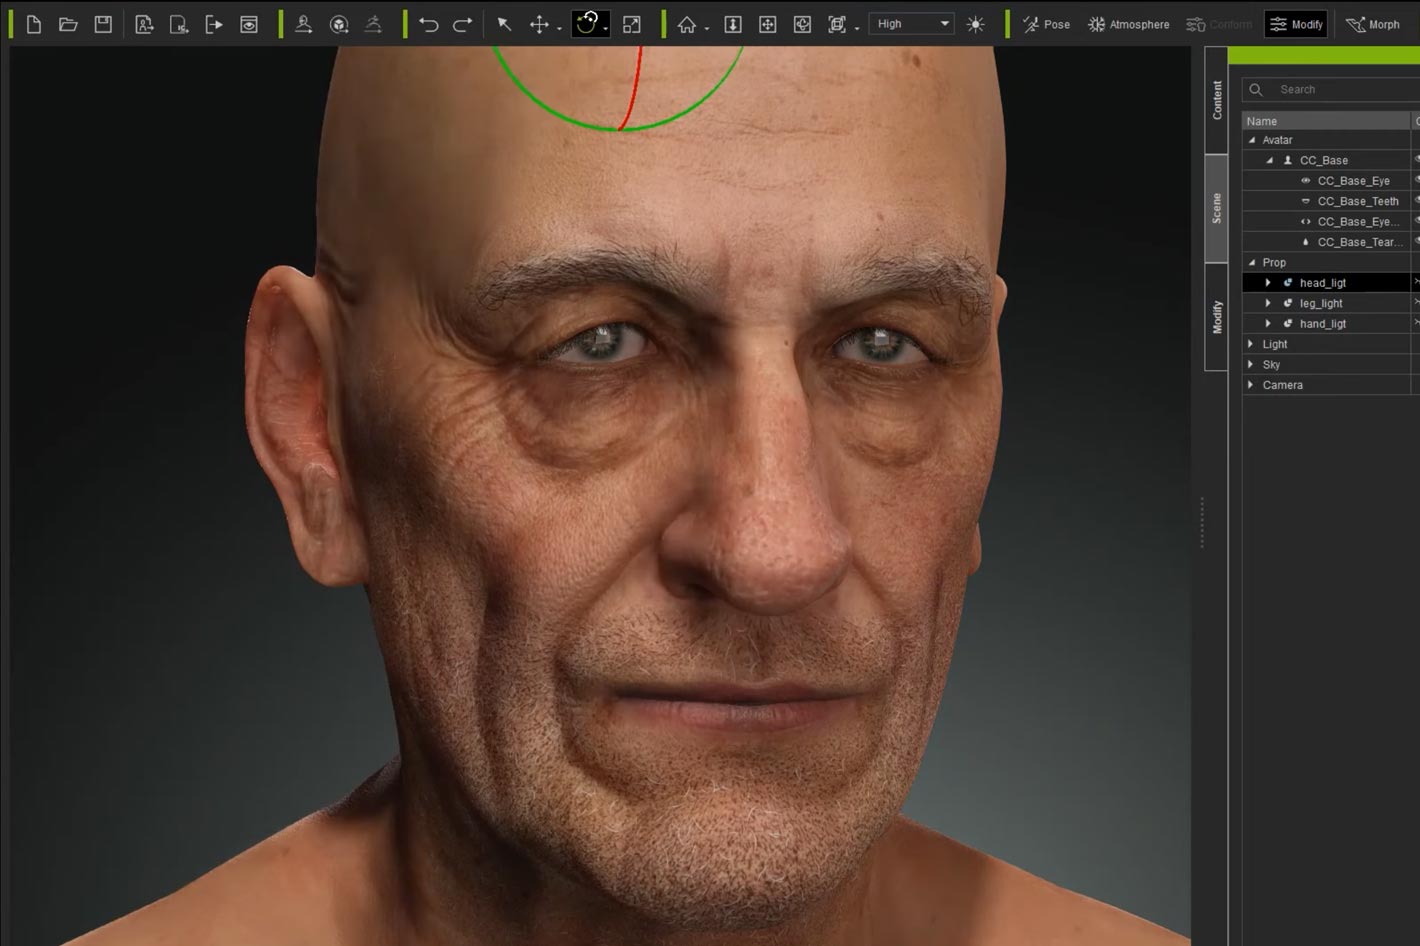 First Look: Reallusion reveals SkinGen for digital humans creation